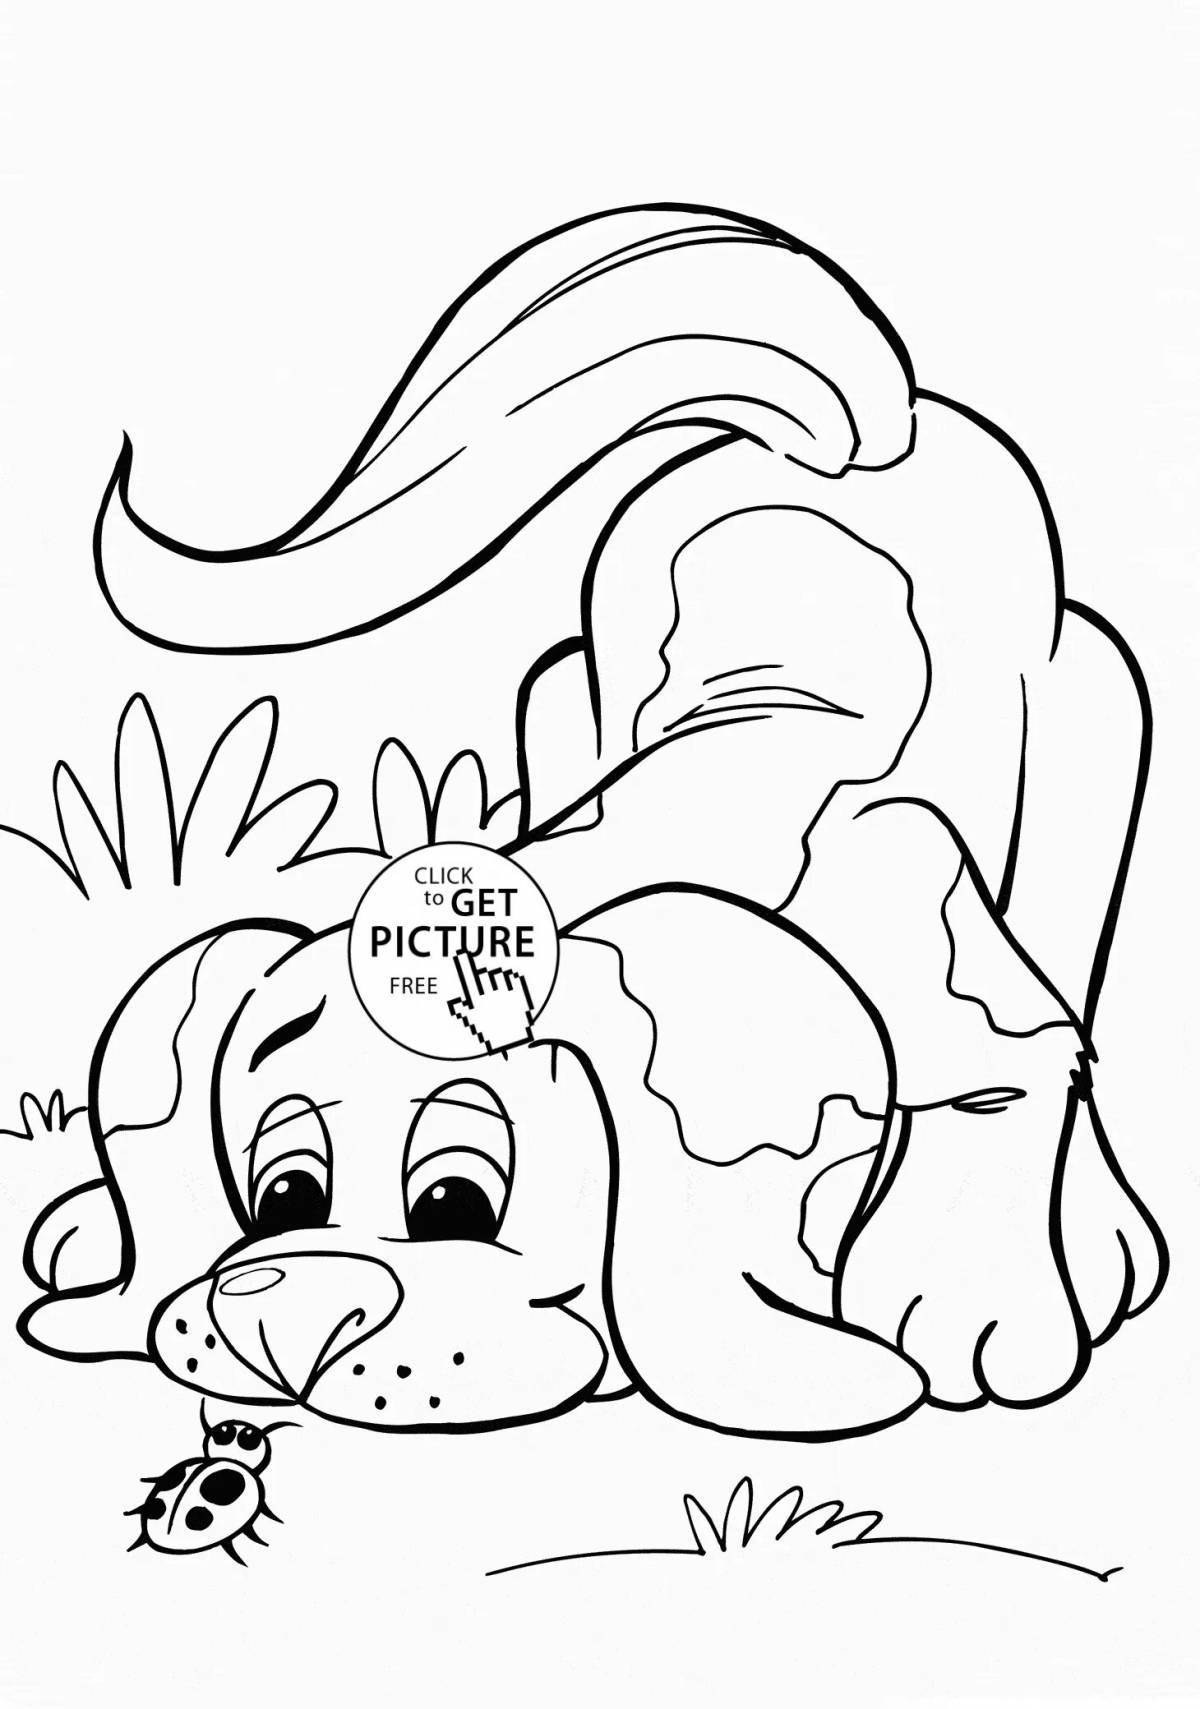 Coloring page inquisitive puppy Mikhalkov